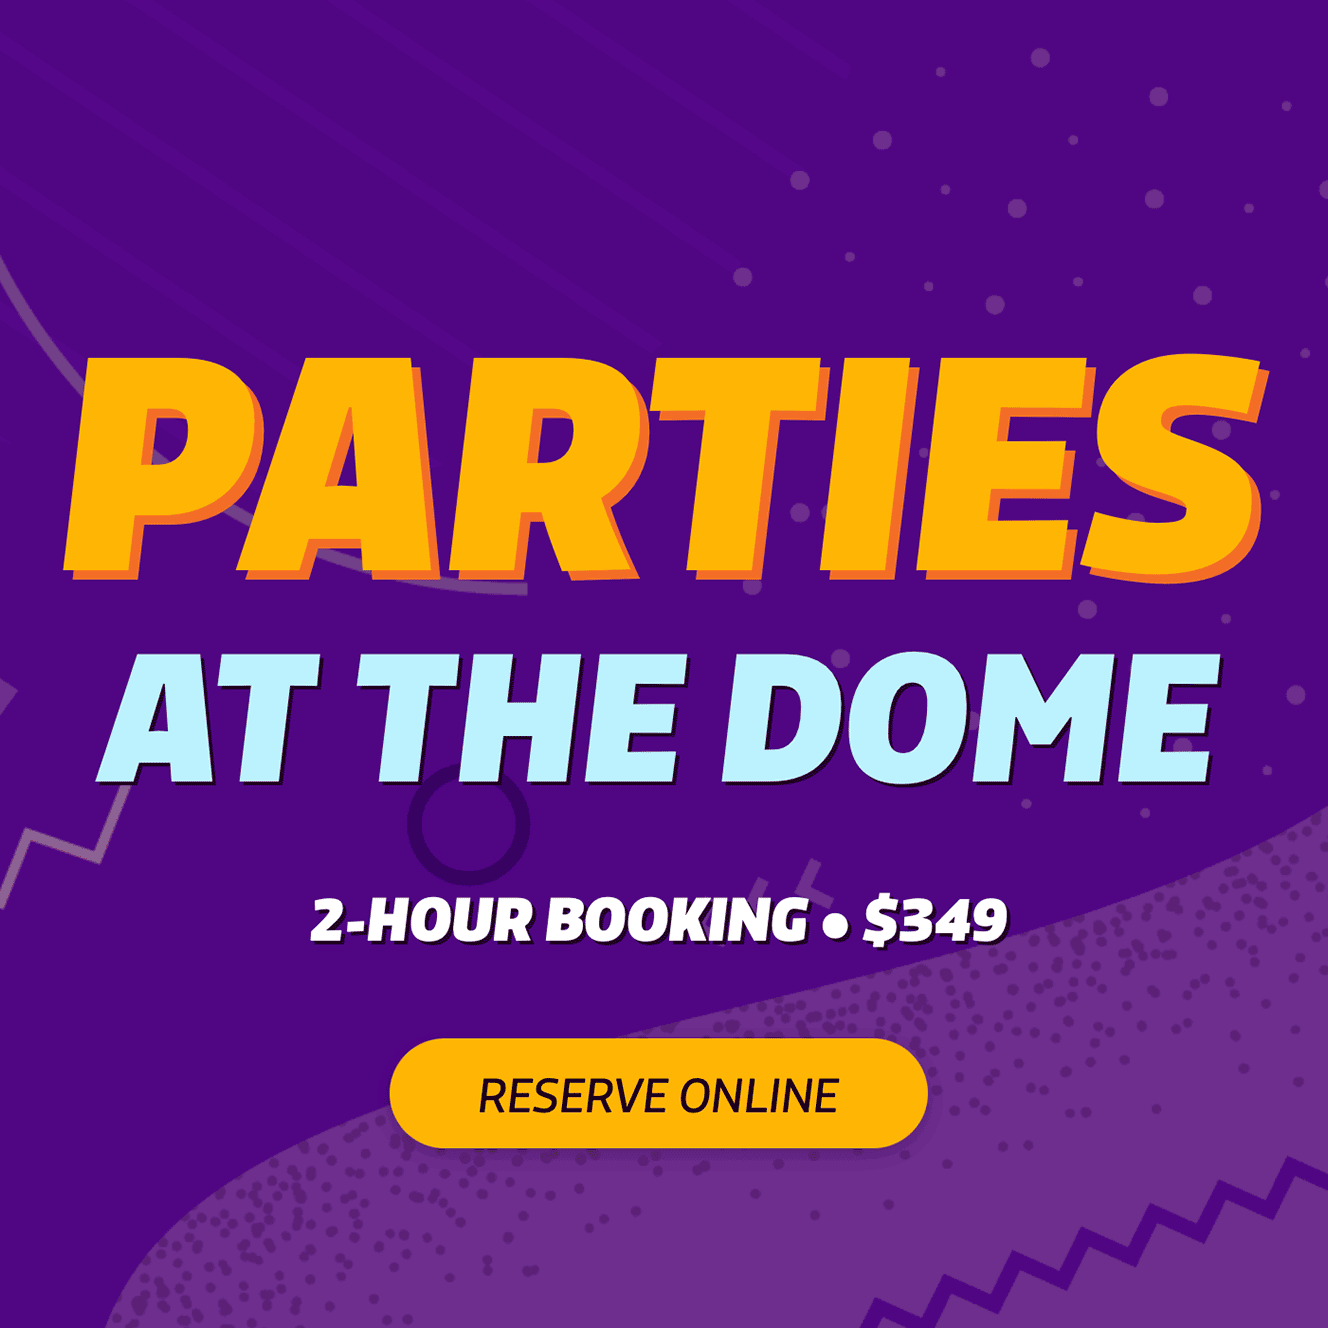 Parties at The Dome - Reserve Online